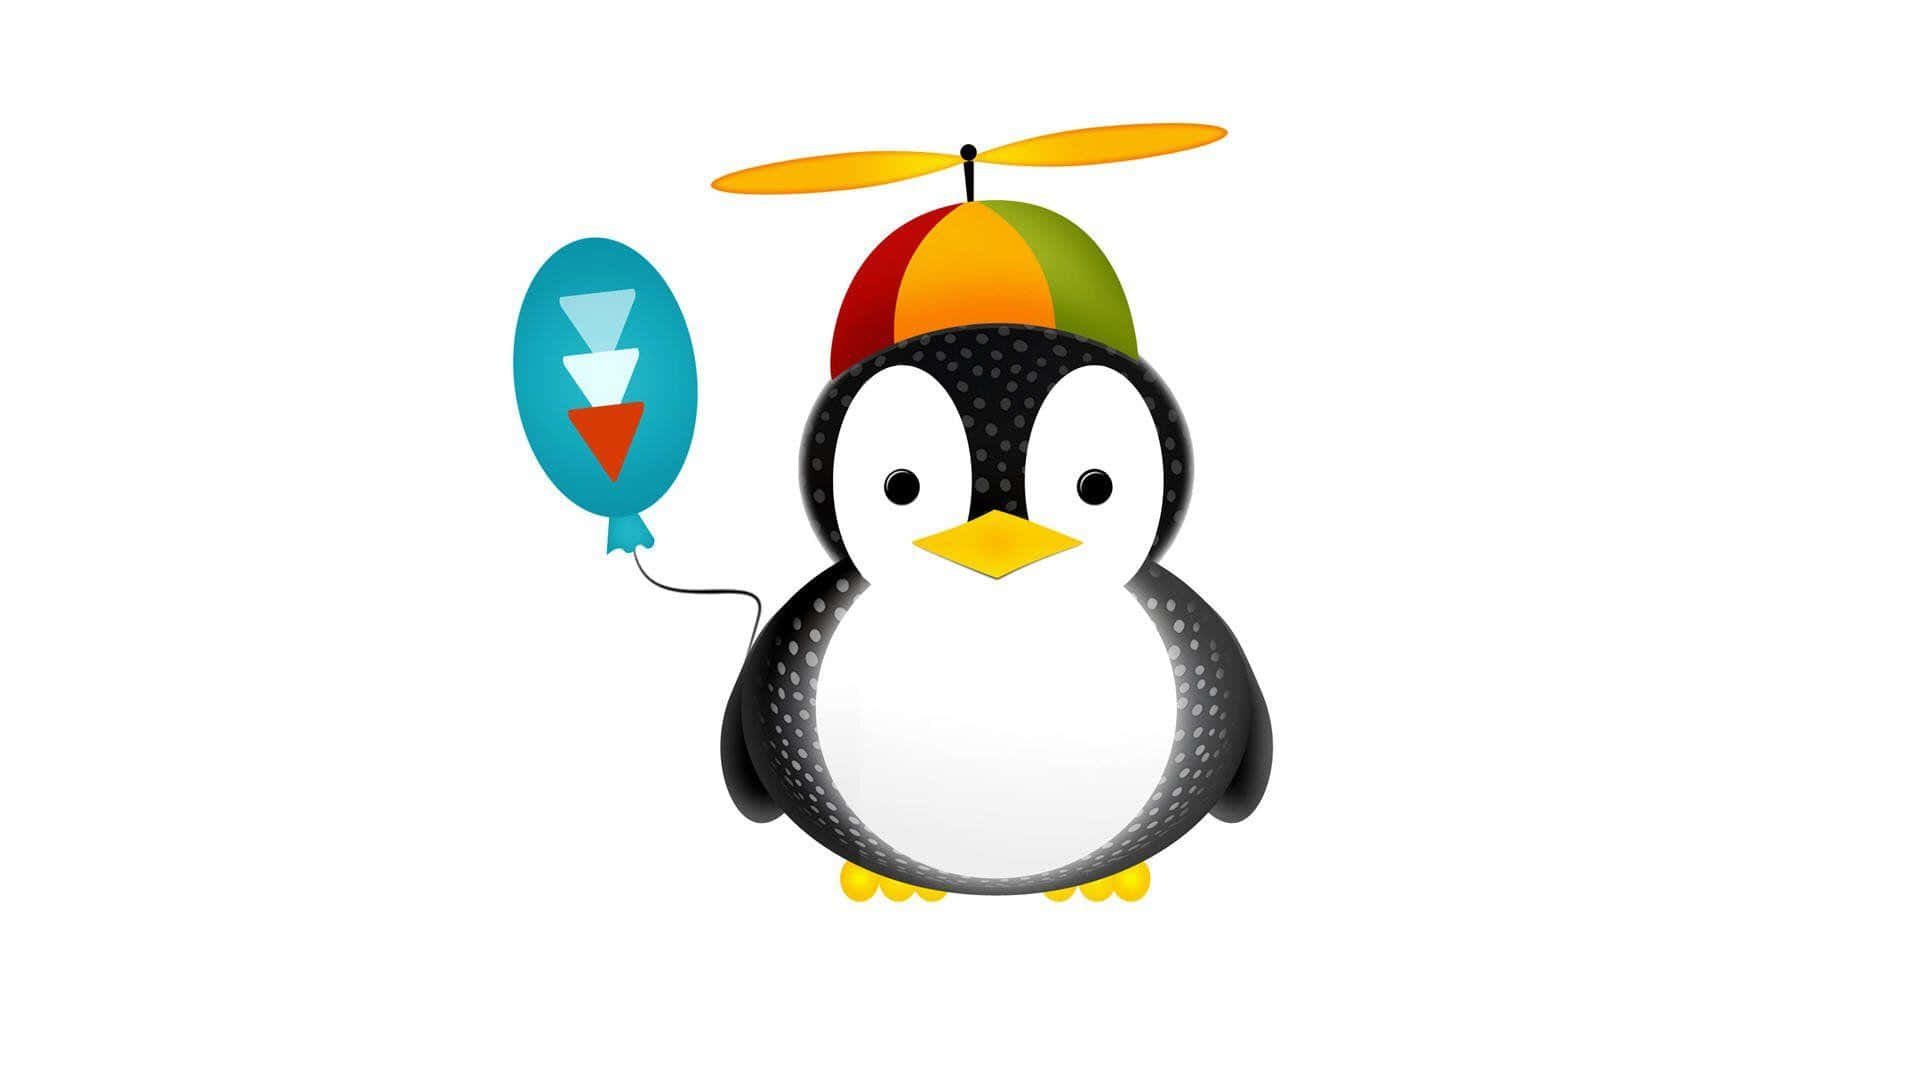 A Penguin Wearing A Colorful Hat And Holding A Balloon